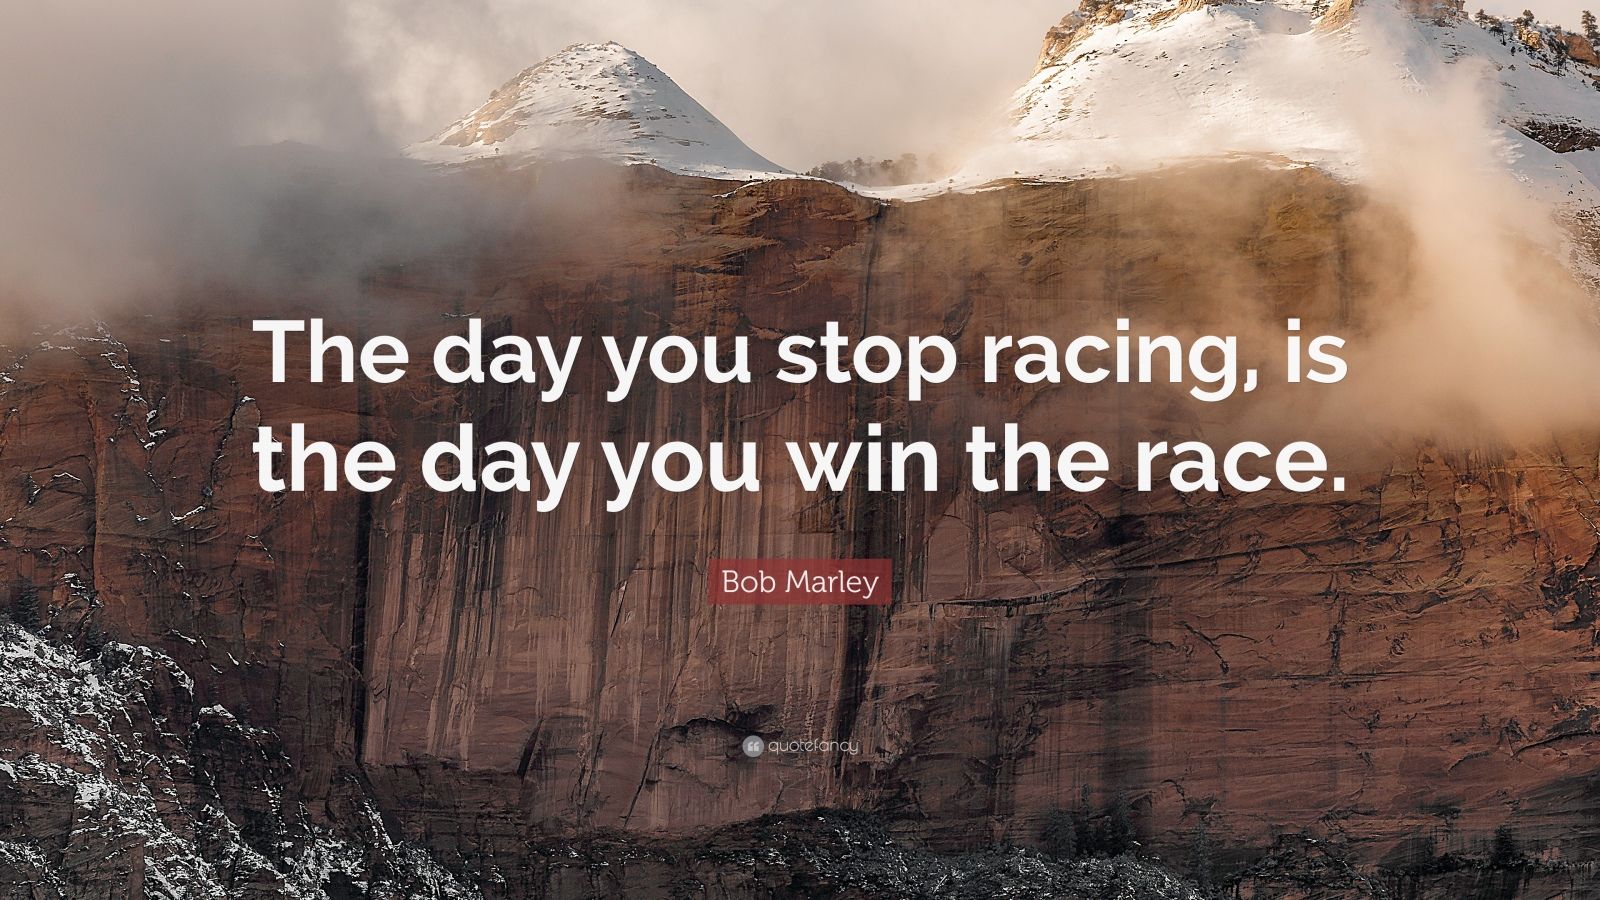 Bob Marley Quote: “The day you stop racing, is the day you win the race